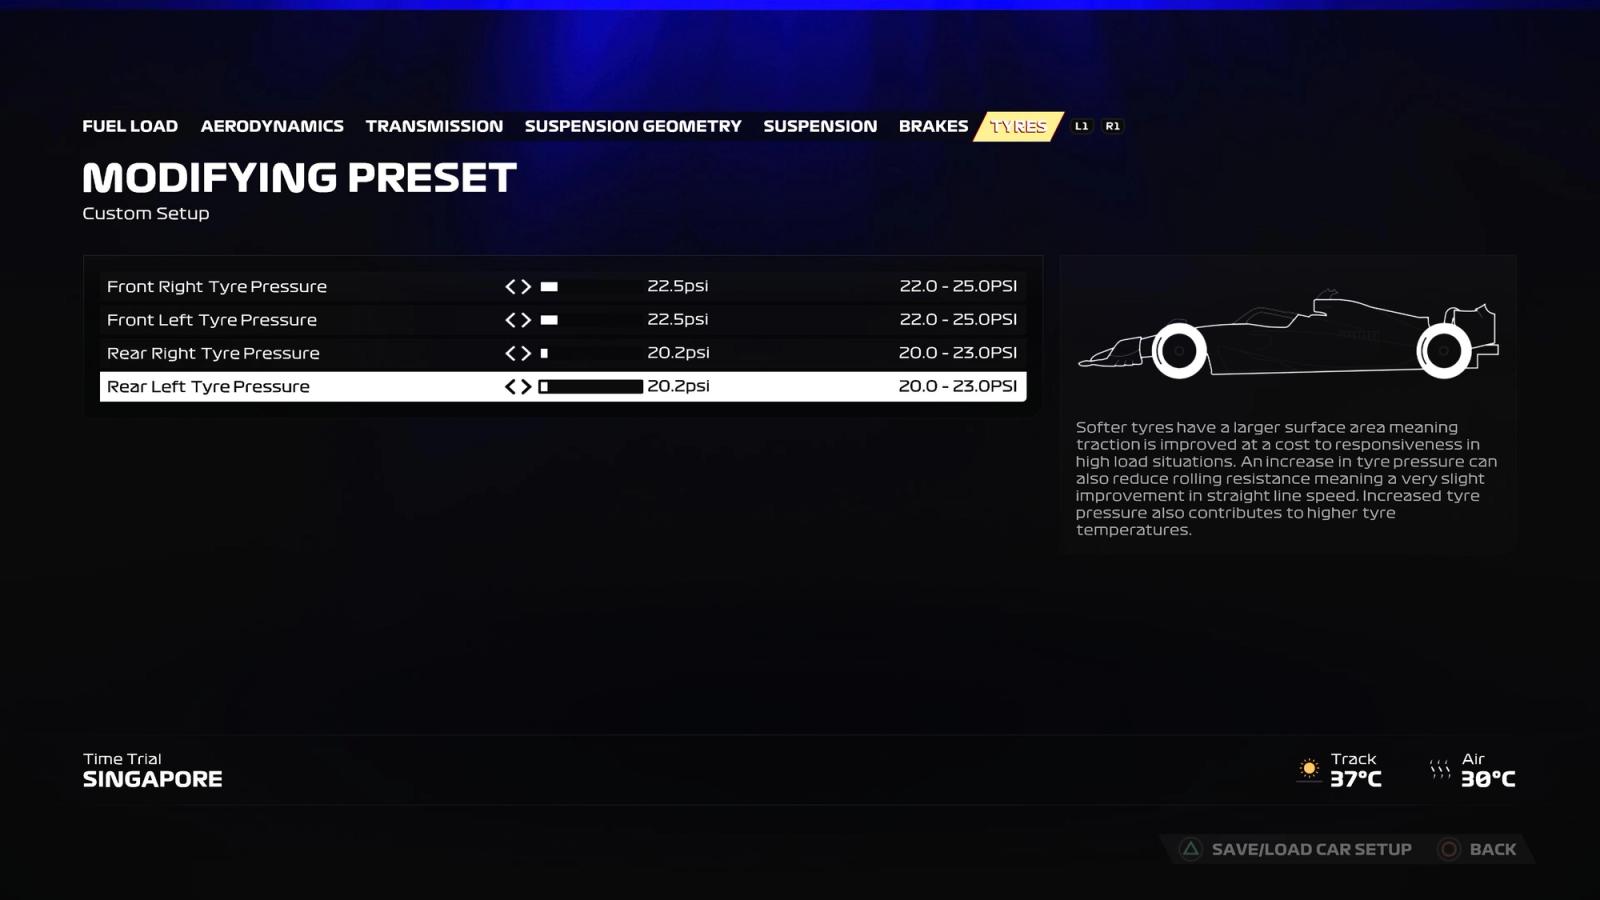 F1 23 Singapore setup tyres screen showing the ideal settings